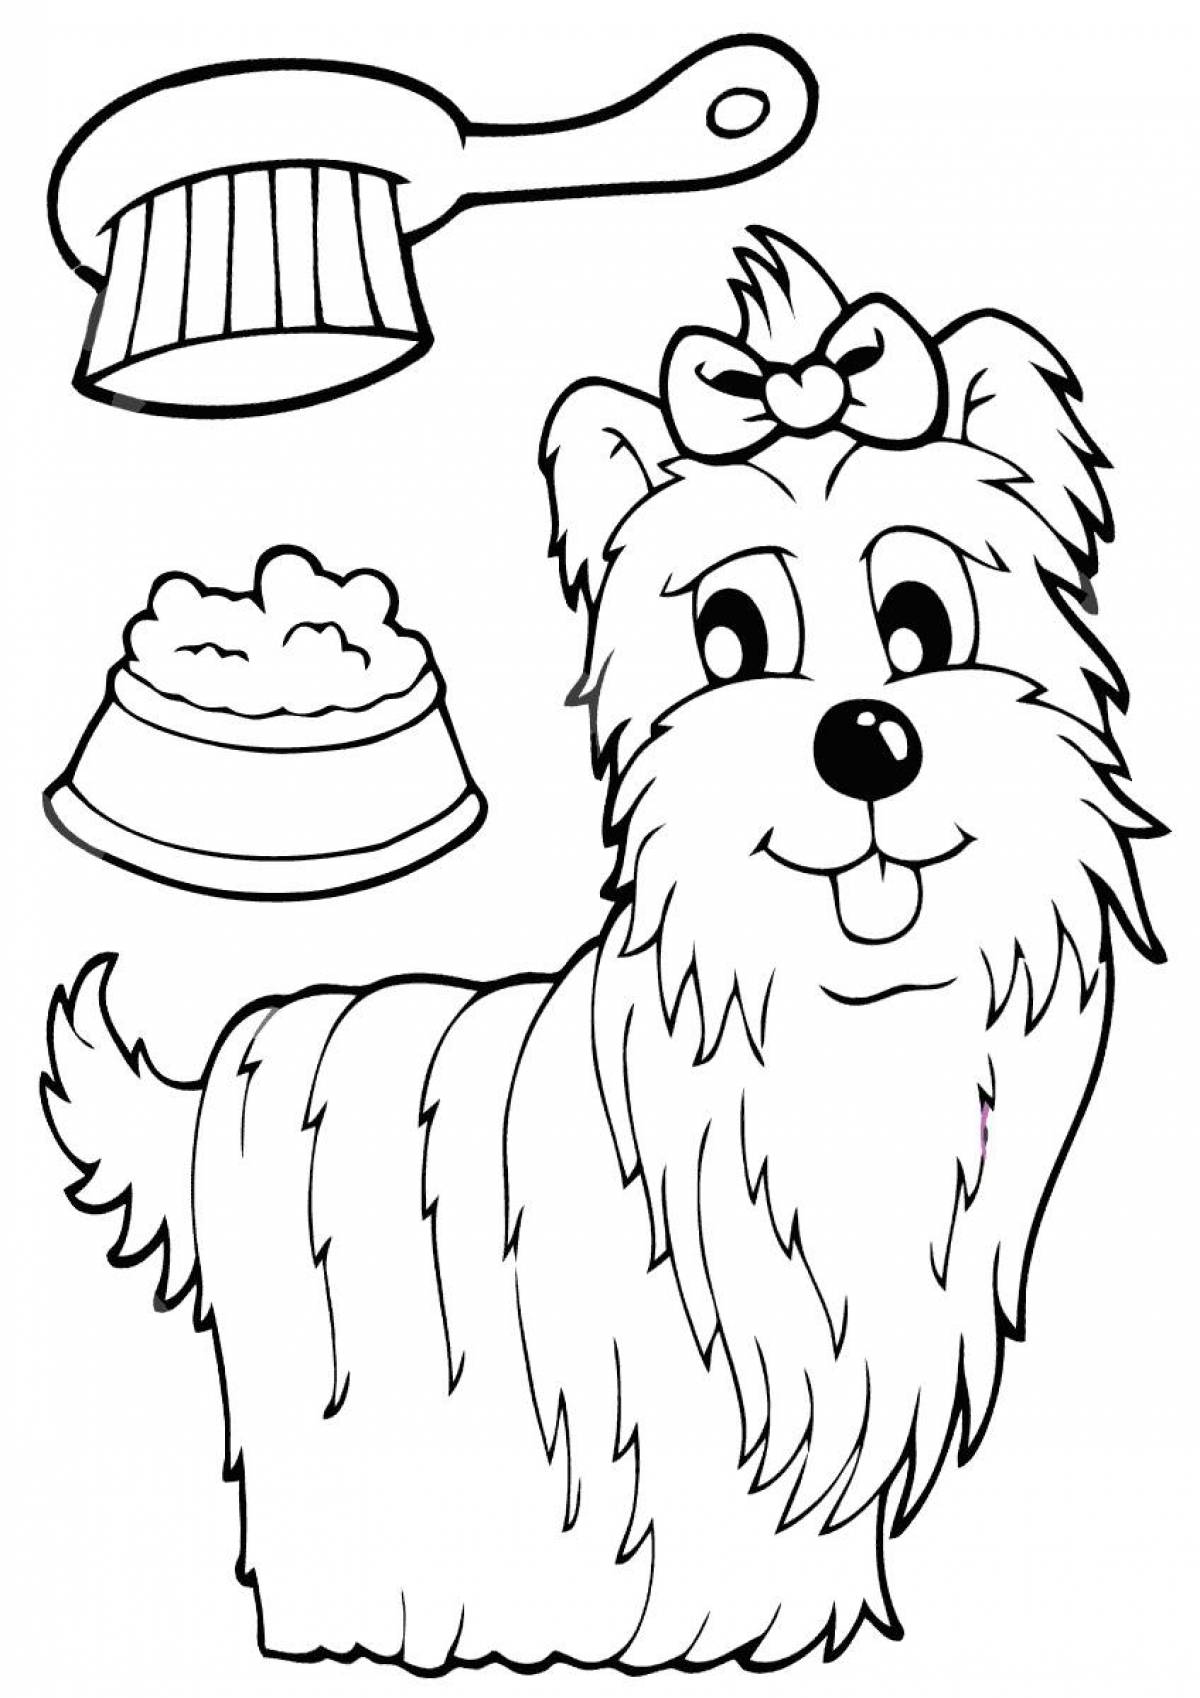 Colouring irresistible yorkshire terrier